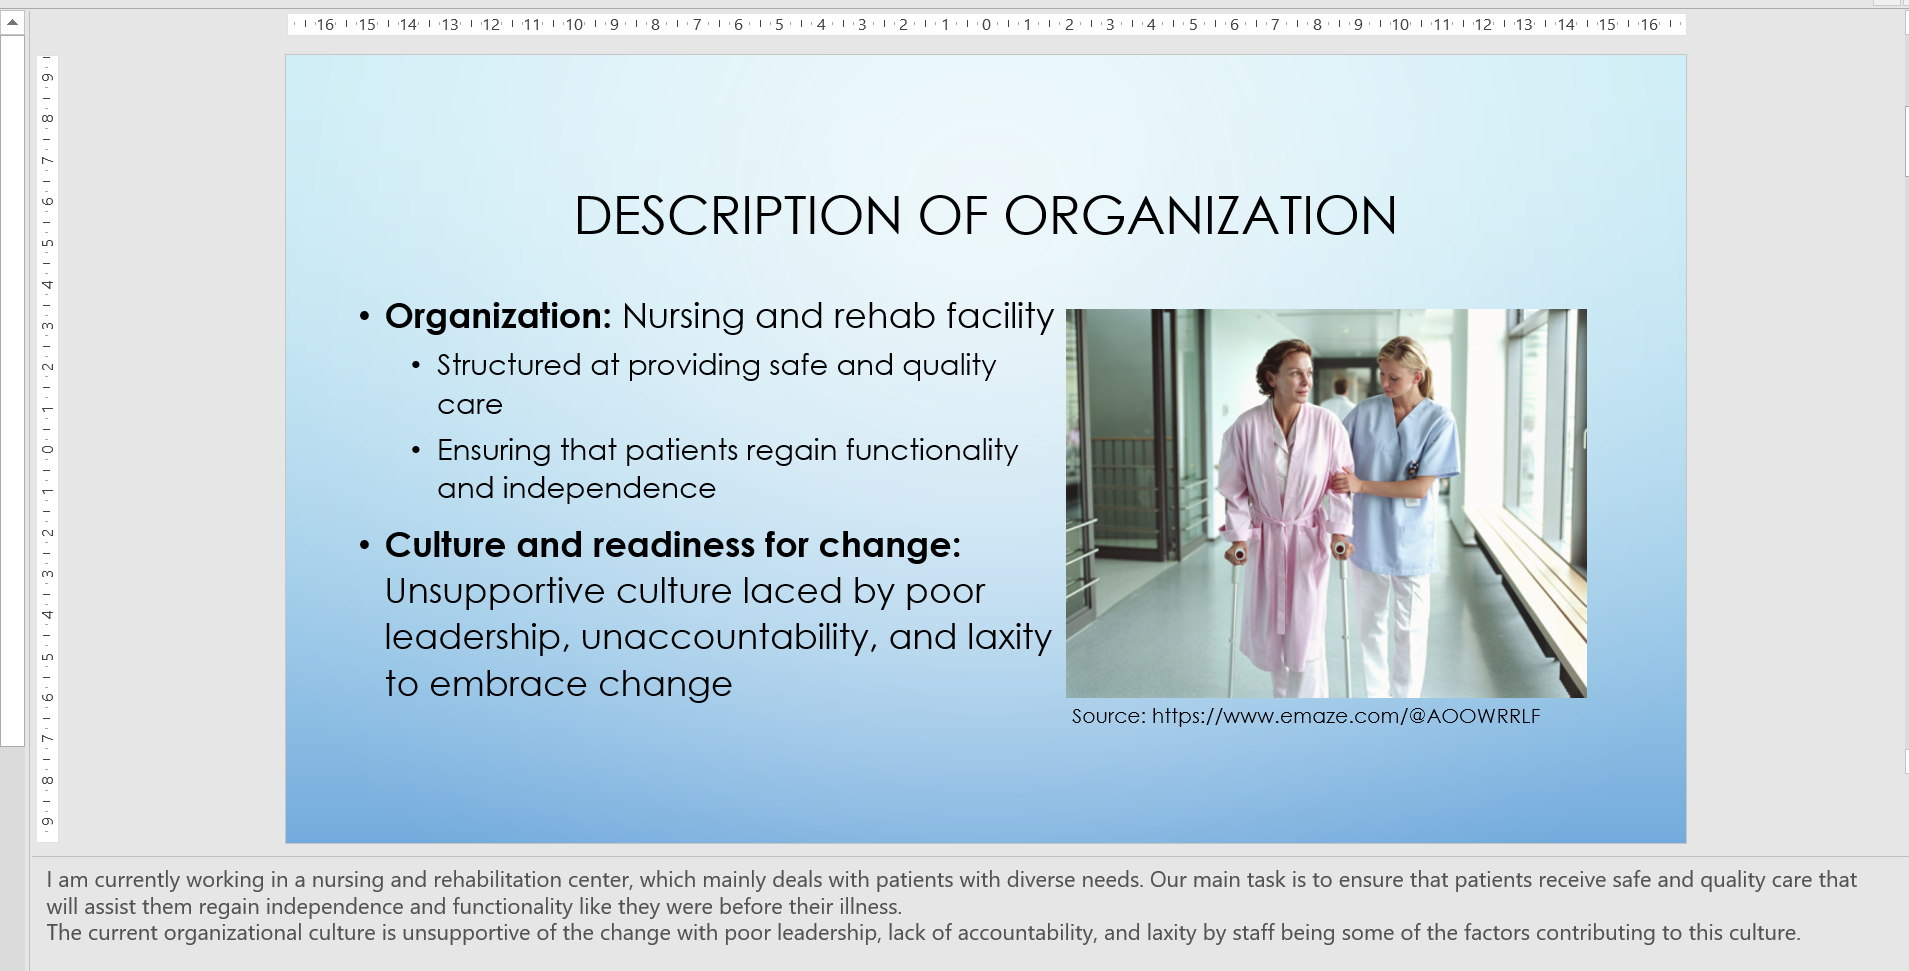 Briefly describe your healthcare organization, including its culture and readiness for change. (You may opt to keep various elements of this anonymous, such as your company name.)